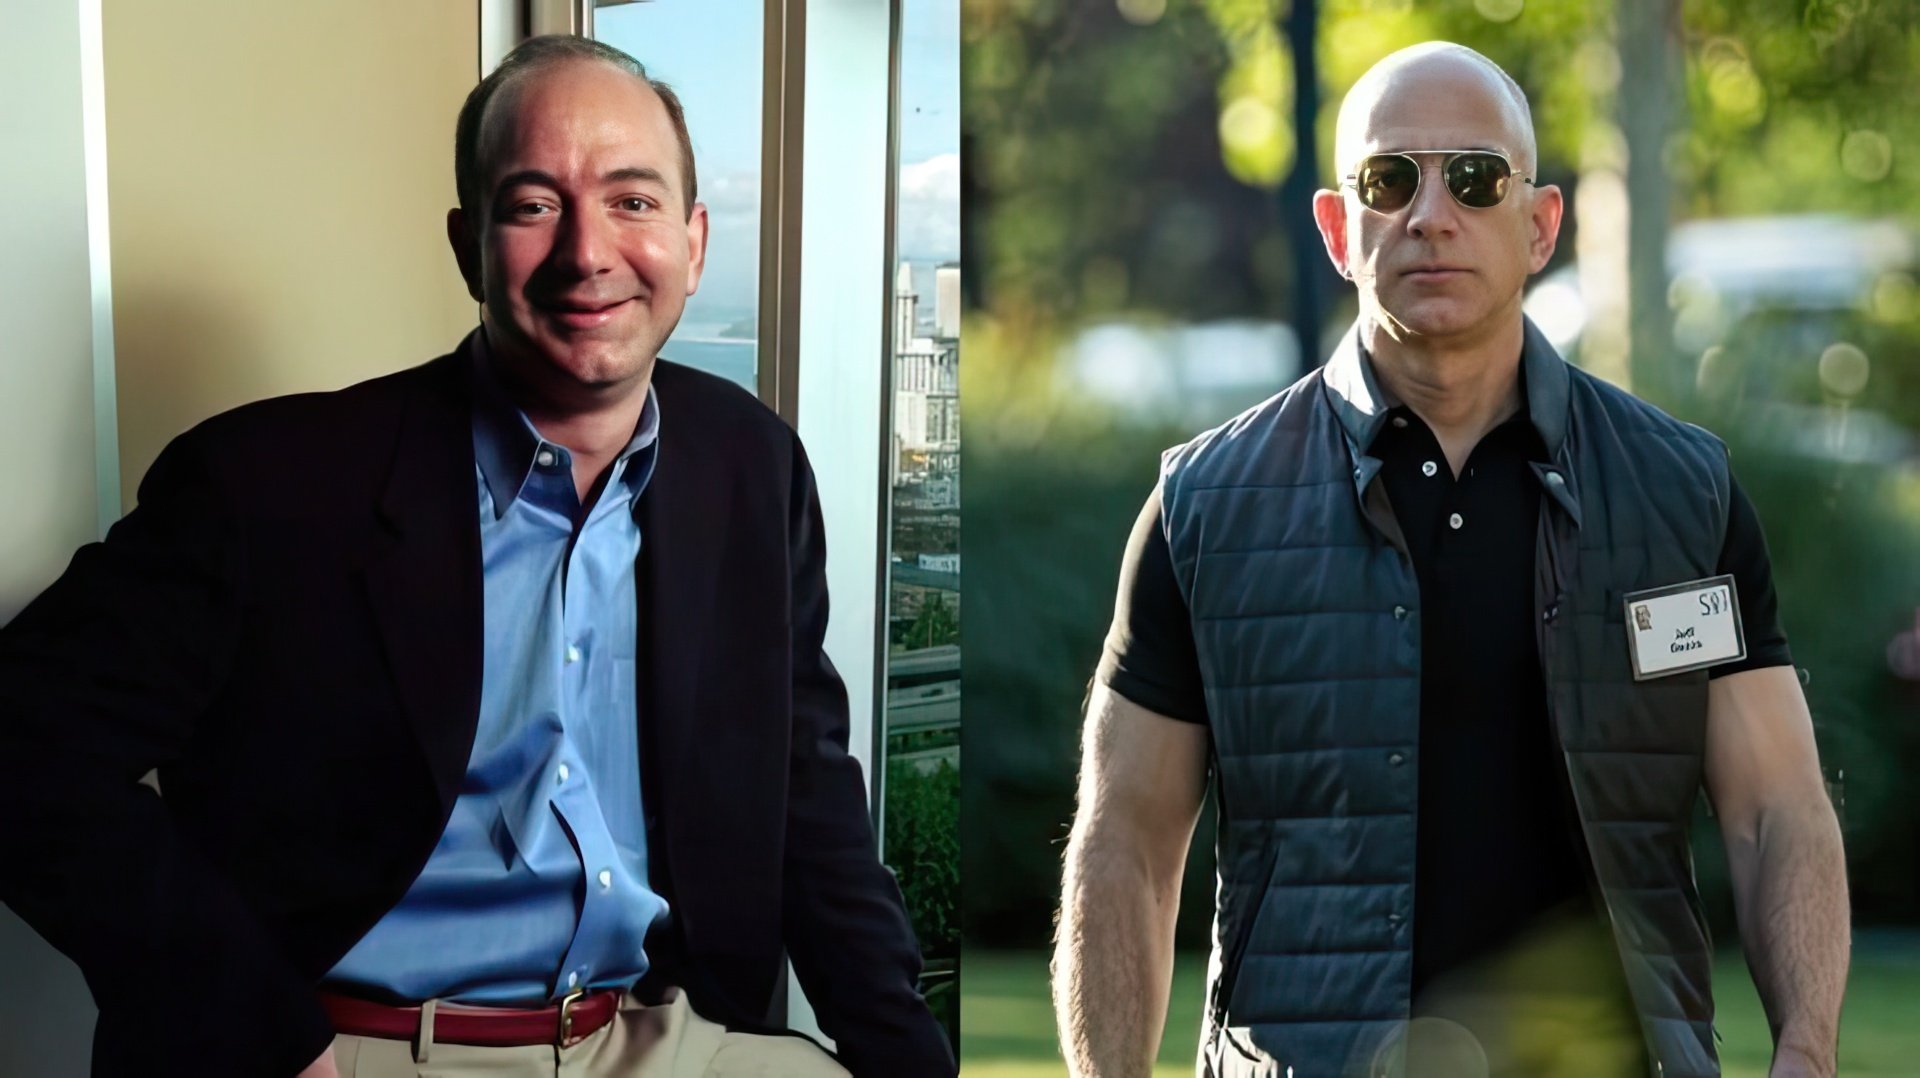 Jeff Bezos in 1998 and 2017